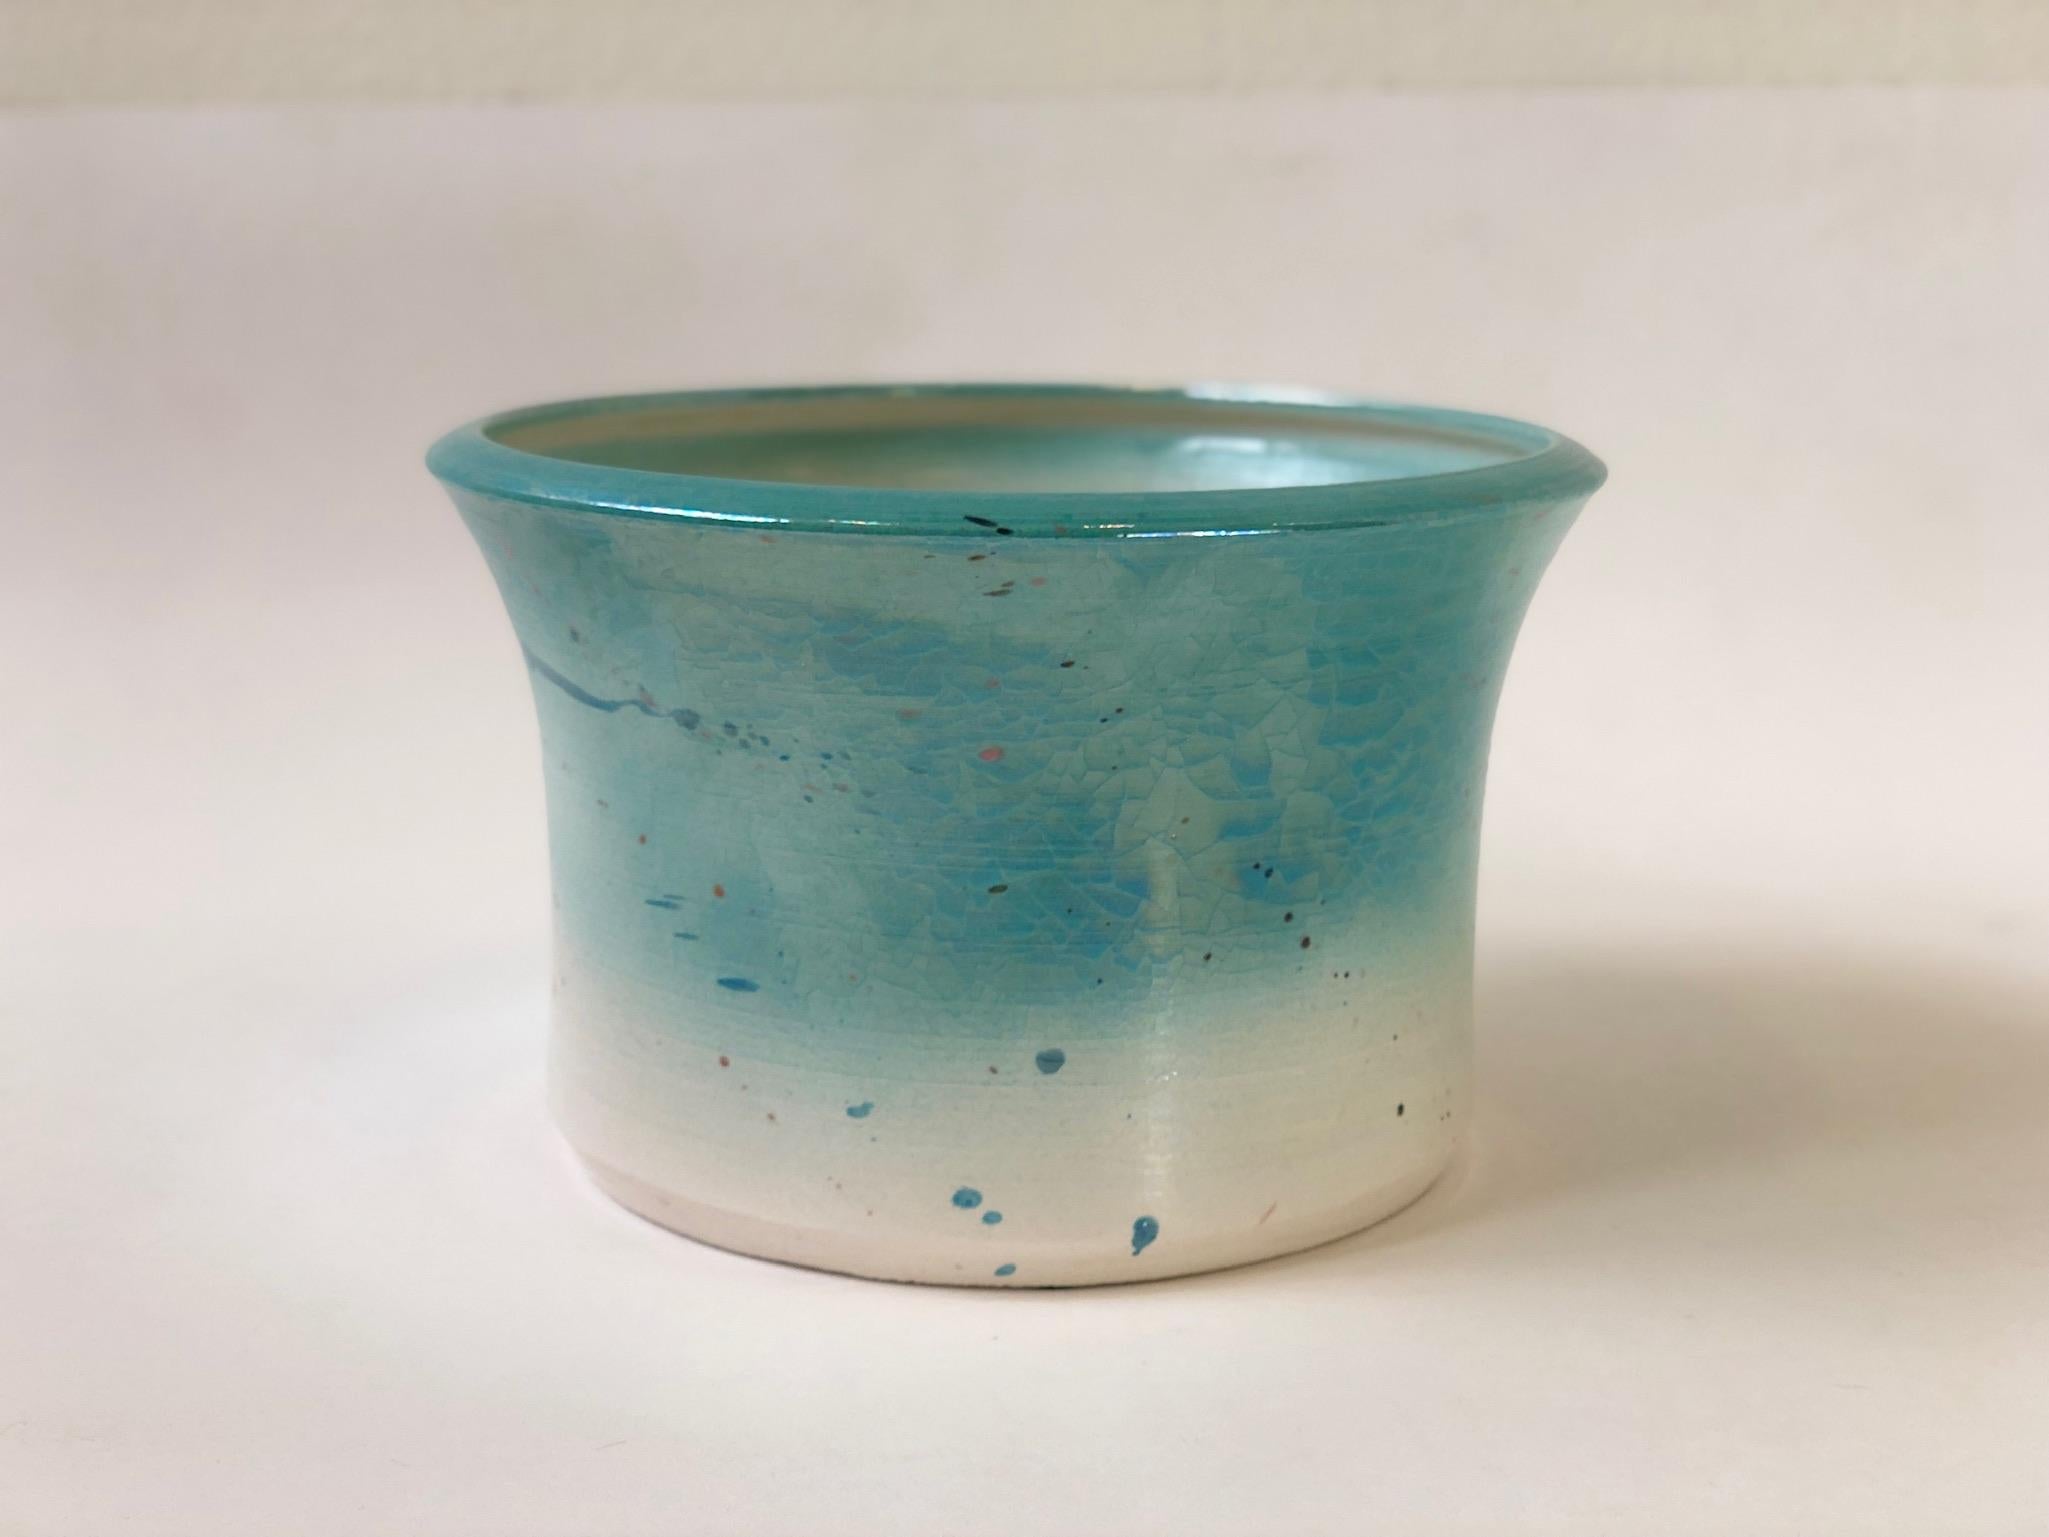 Late 20th Century Studio Ceramic Planter by Gary McCloy for Steve Chase